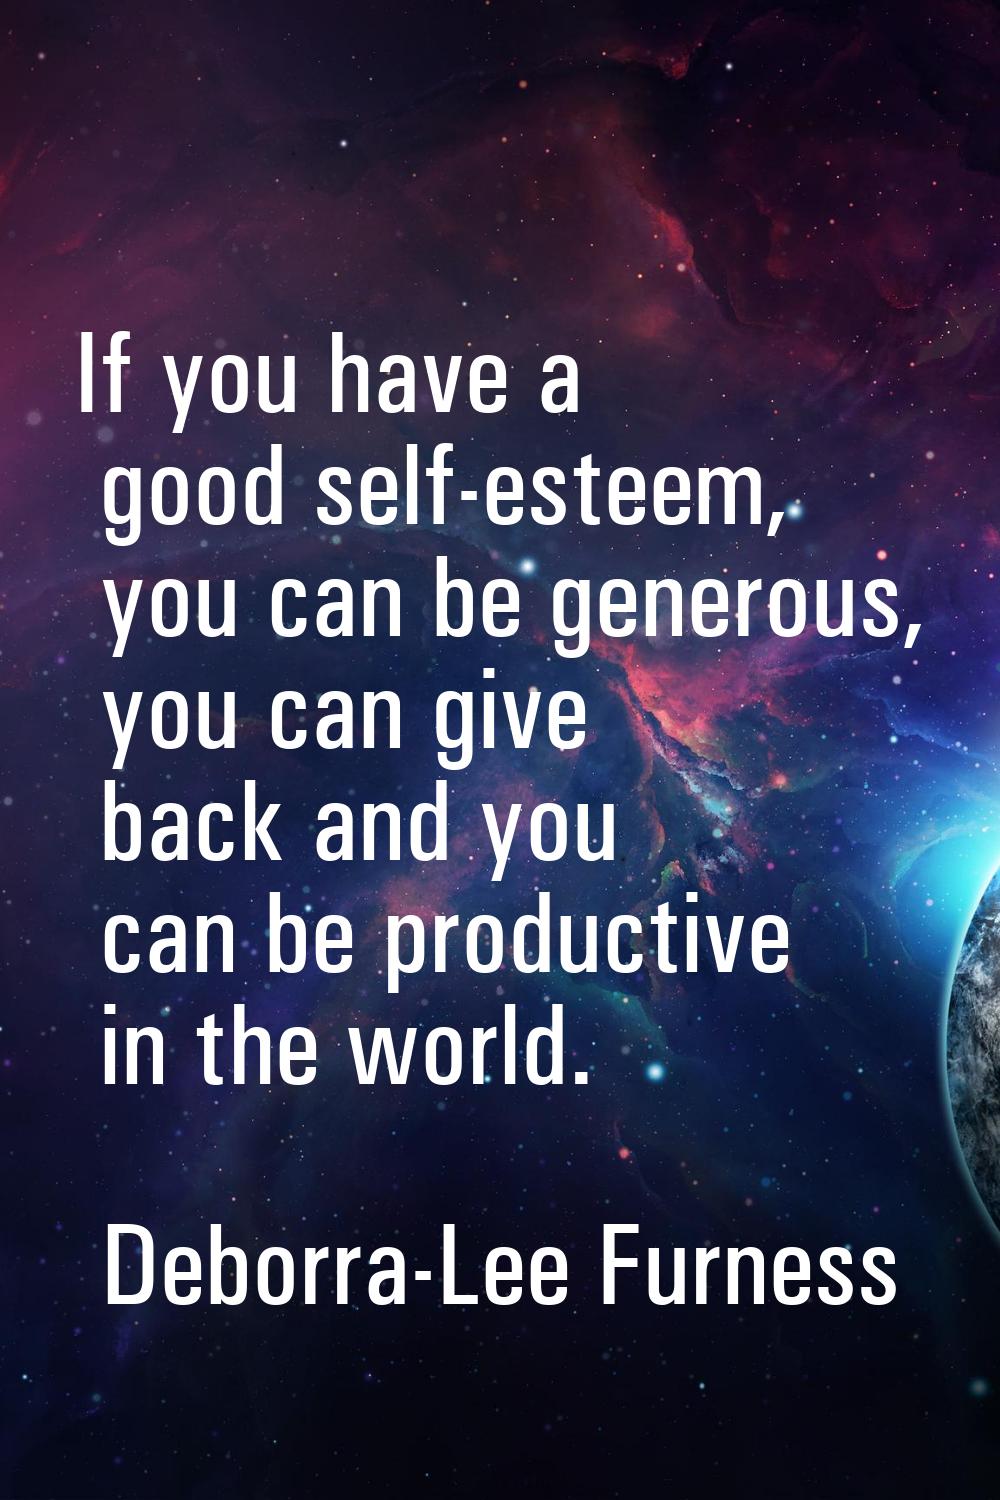 If you have a good self-esteem, you can be generous, you can give back and you can be productive in